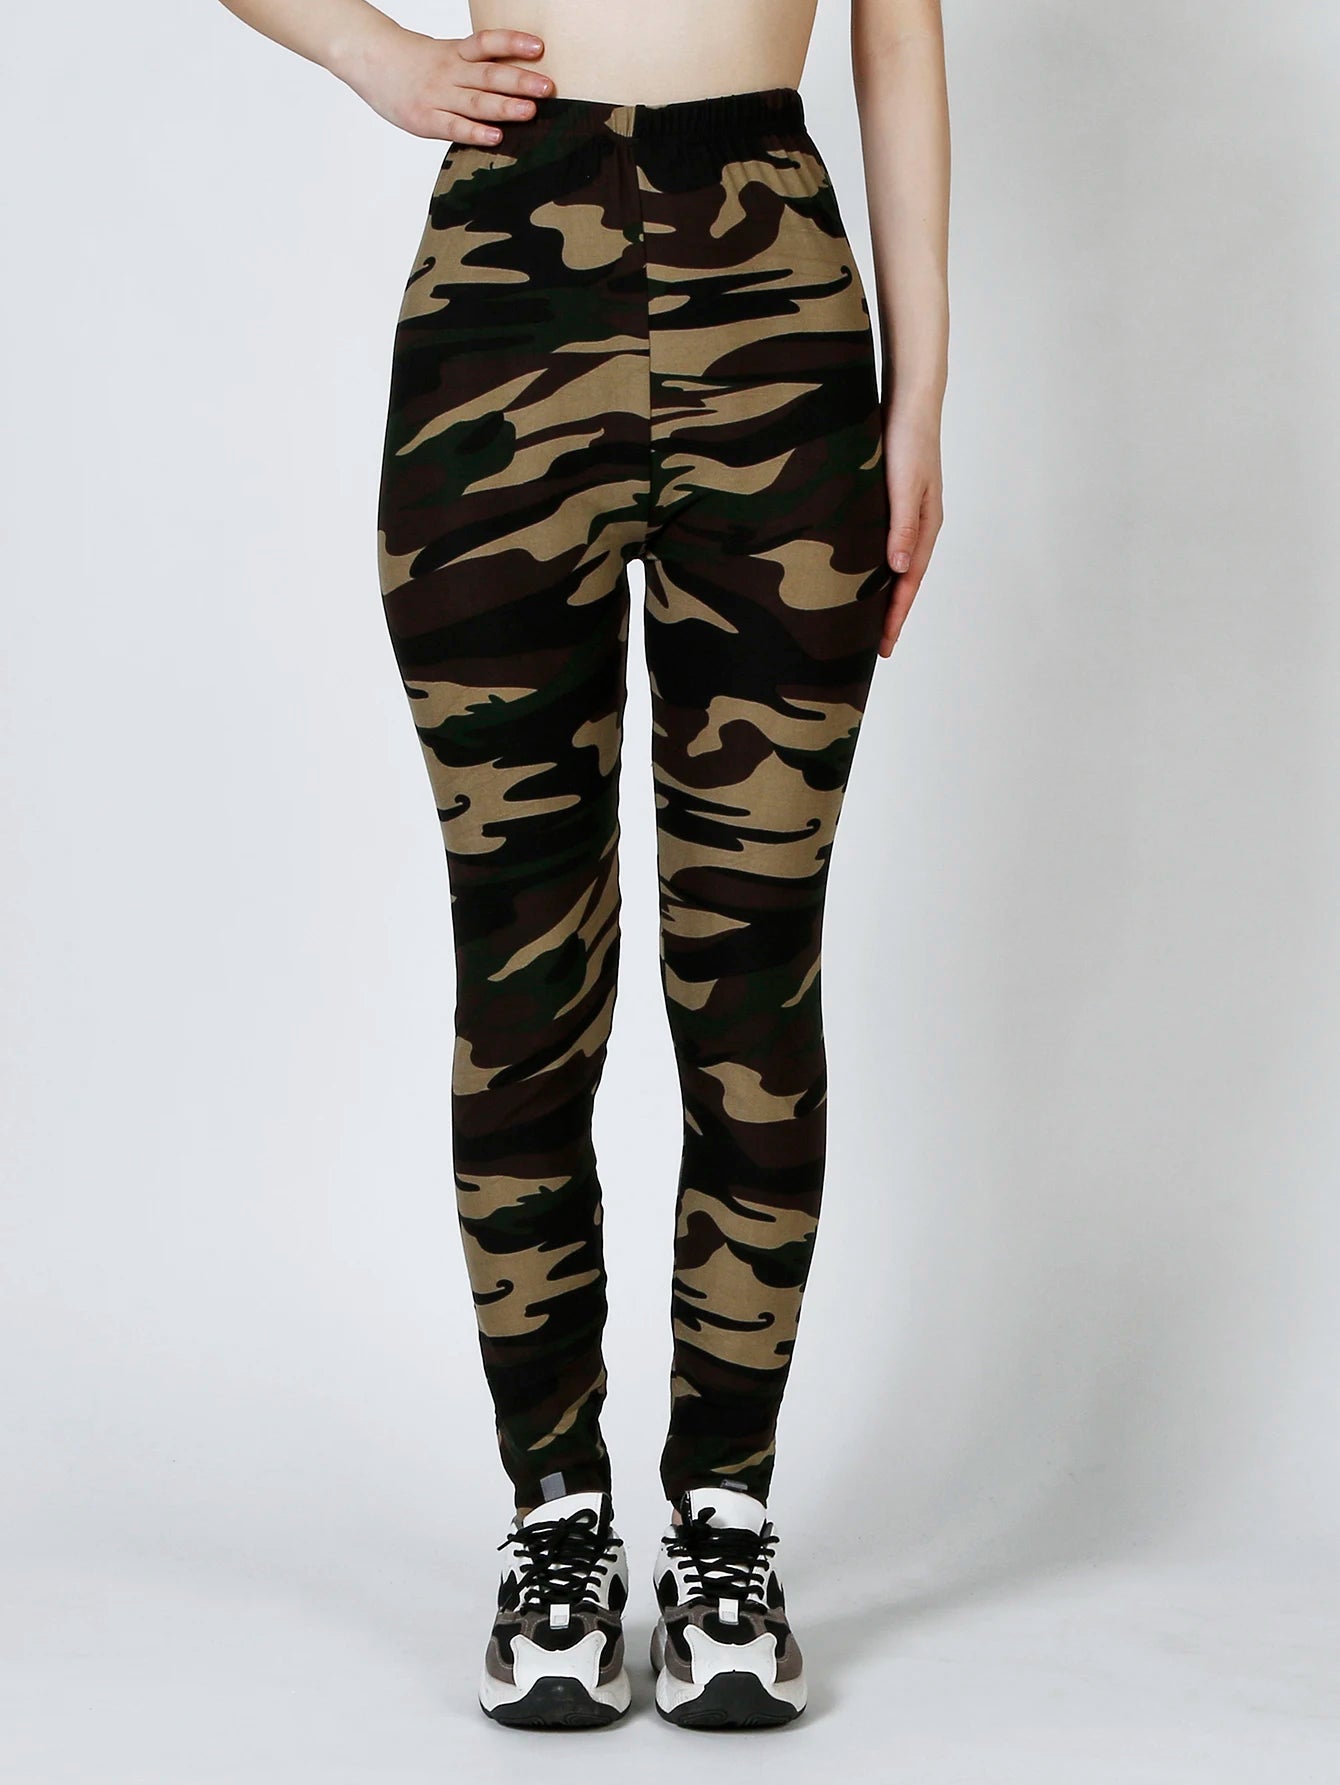 CUHAKCI New Brand Women's Leggings High Elastic Tight Camo Leggings Spring and Autumn Tight Women's Sexy and Charming Casual Pan